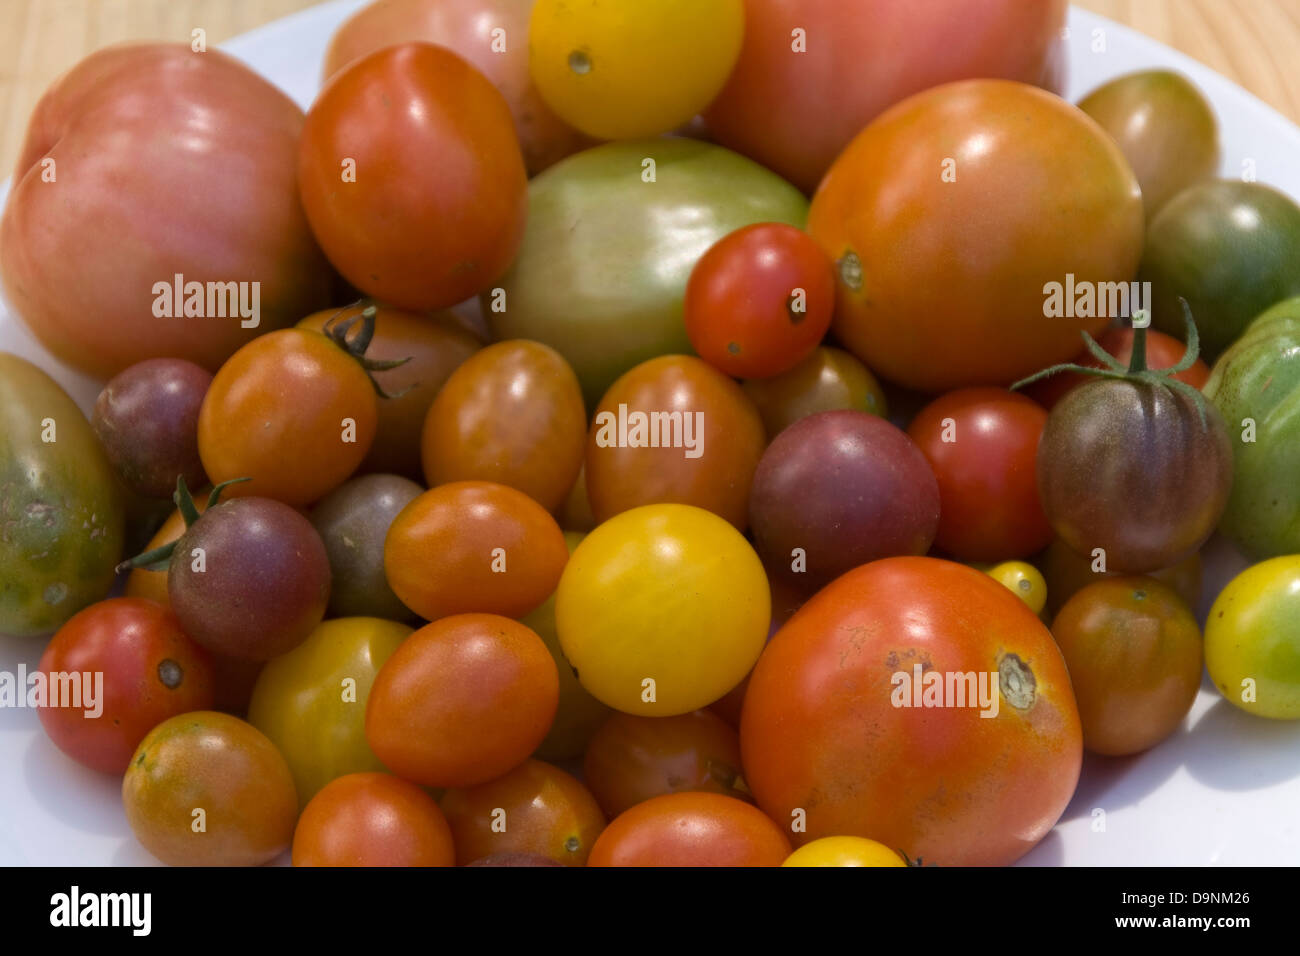 A mixed plate of freshly harvested tomato varieties Stock Photo